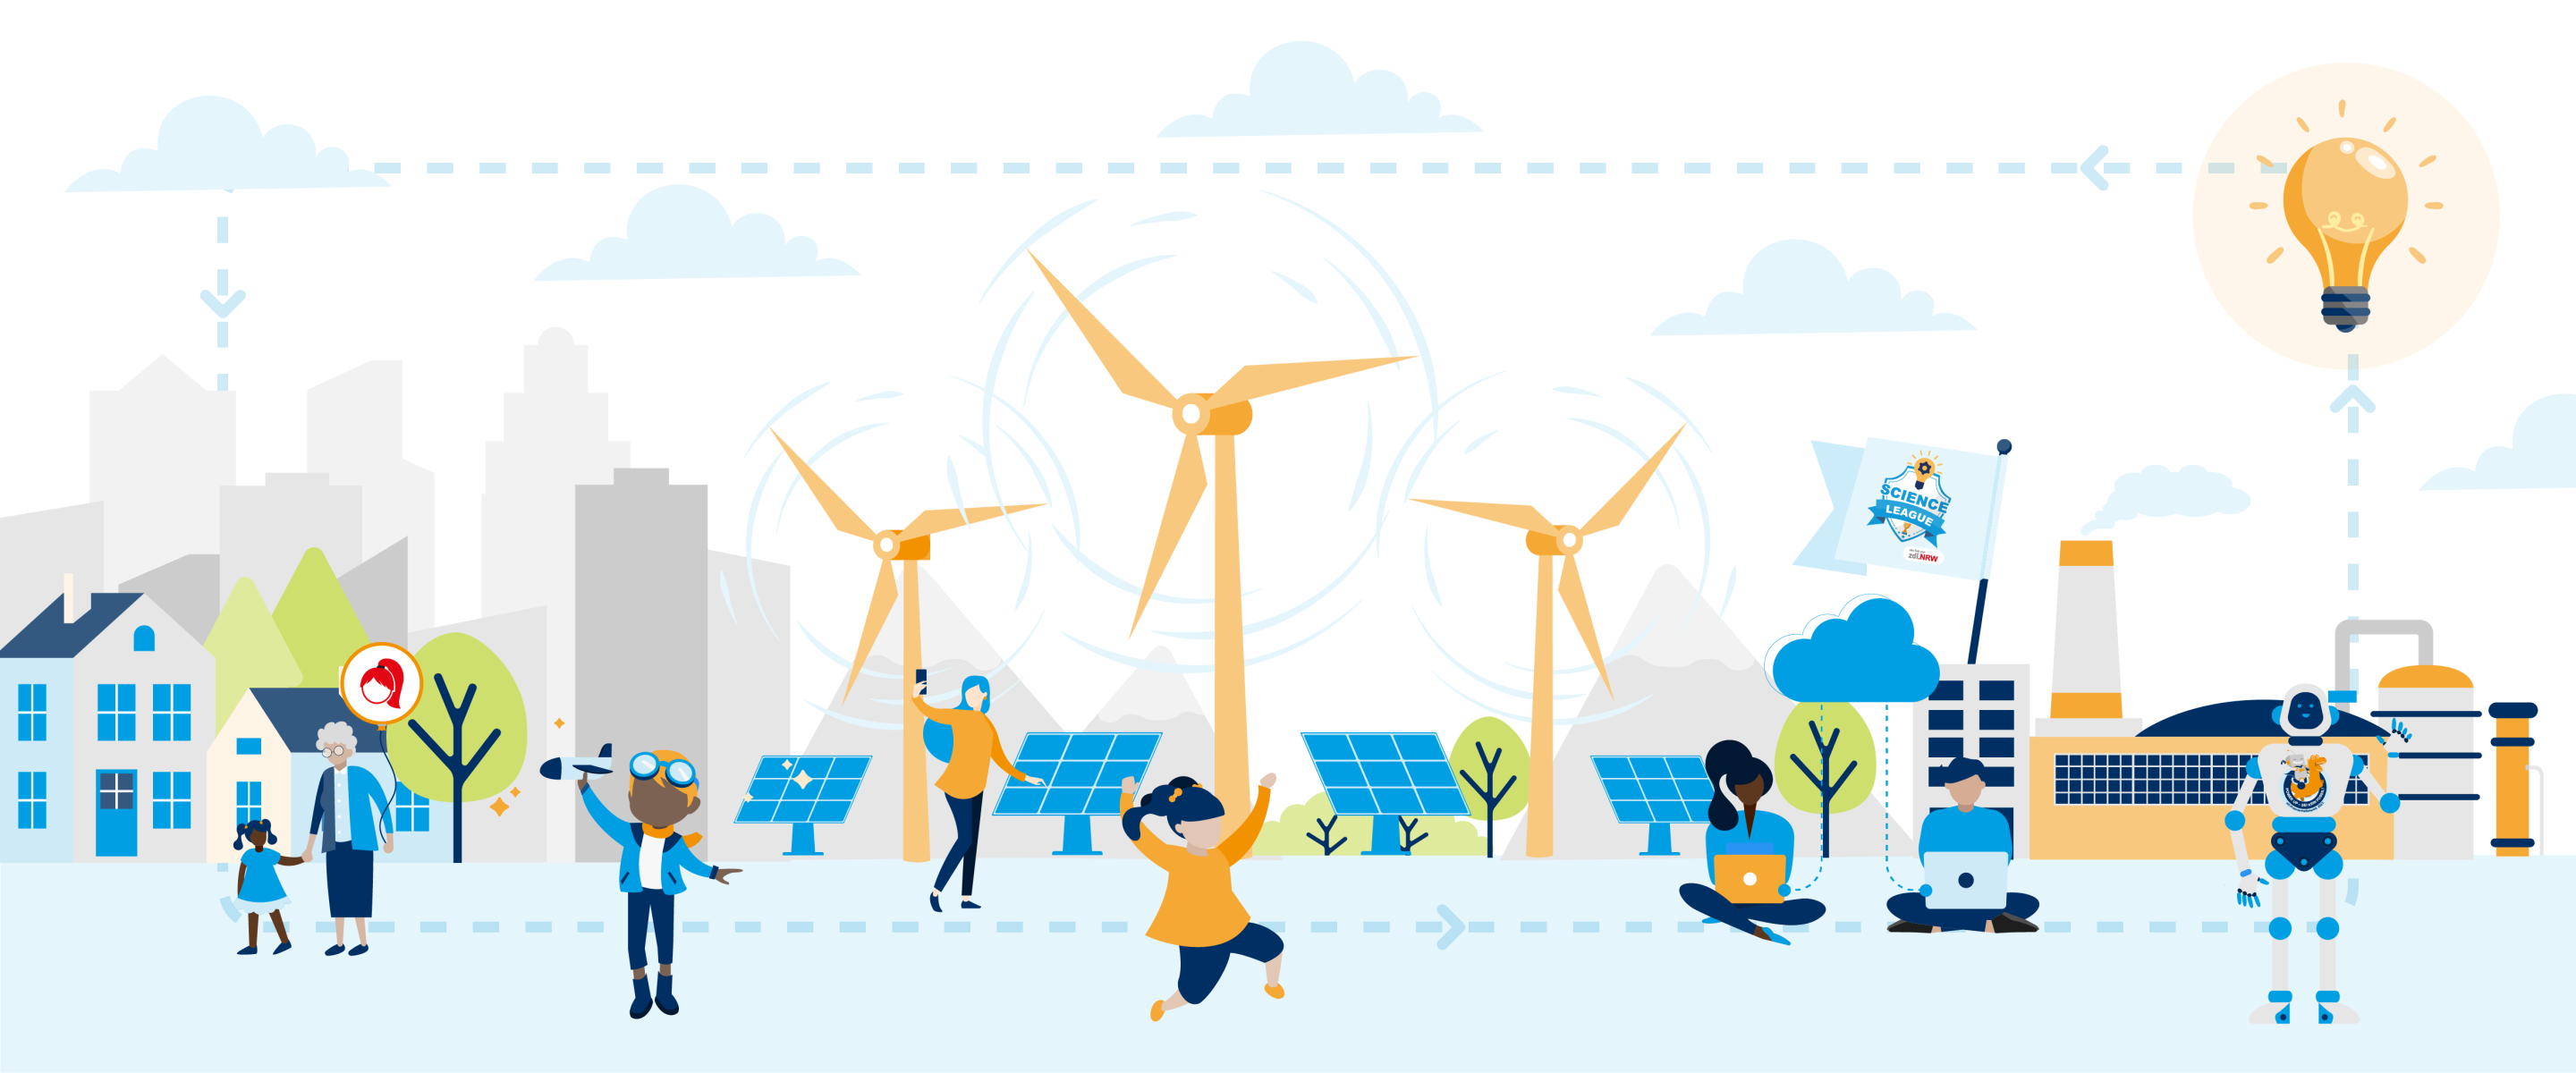 Many different people stand, sit, play and work in front of an urban background with lots of solar panels and wind turbines. The picture symbolizes sustainable energy management.